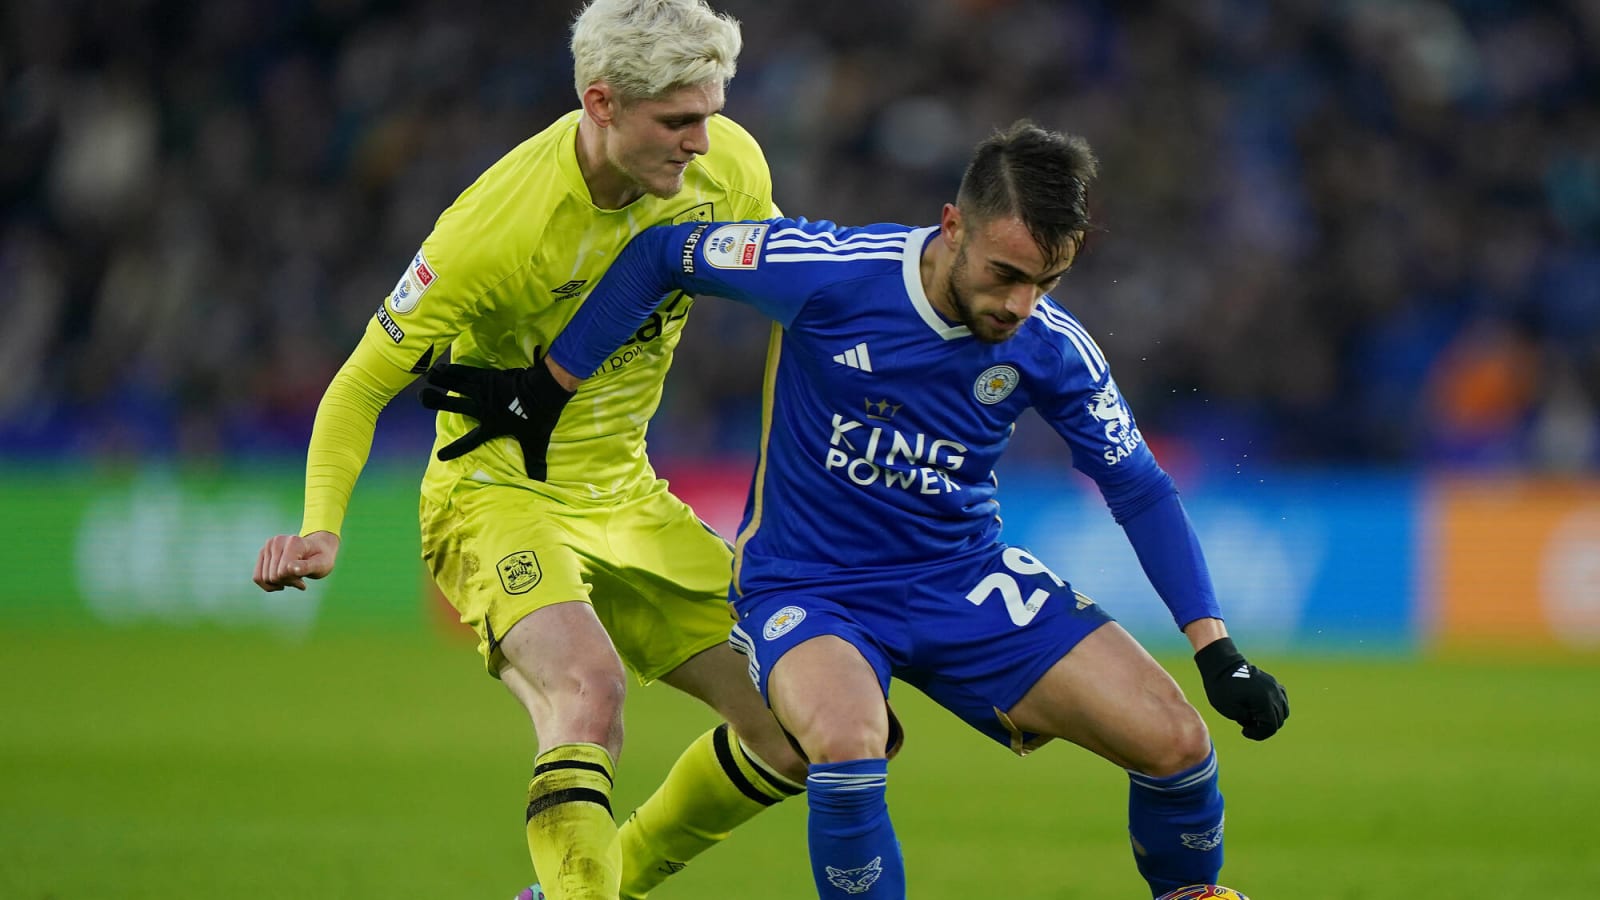 'He can do much more' – Leicester City manager not satisfied with attacker despite goal-scoring performance